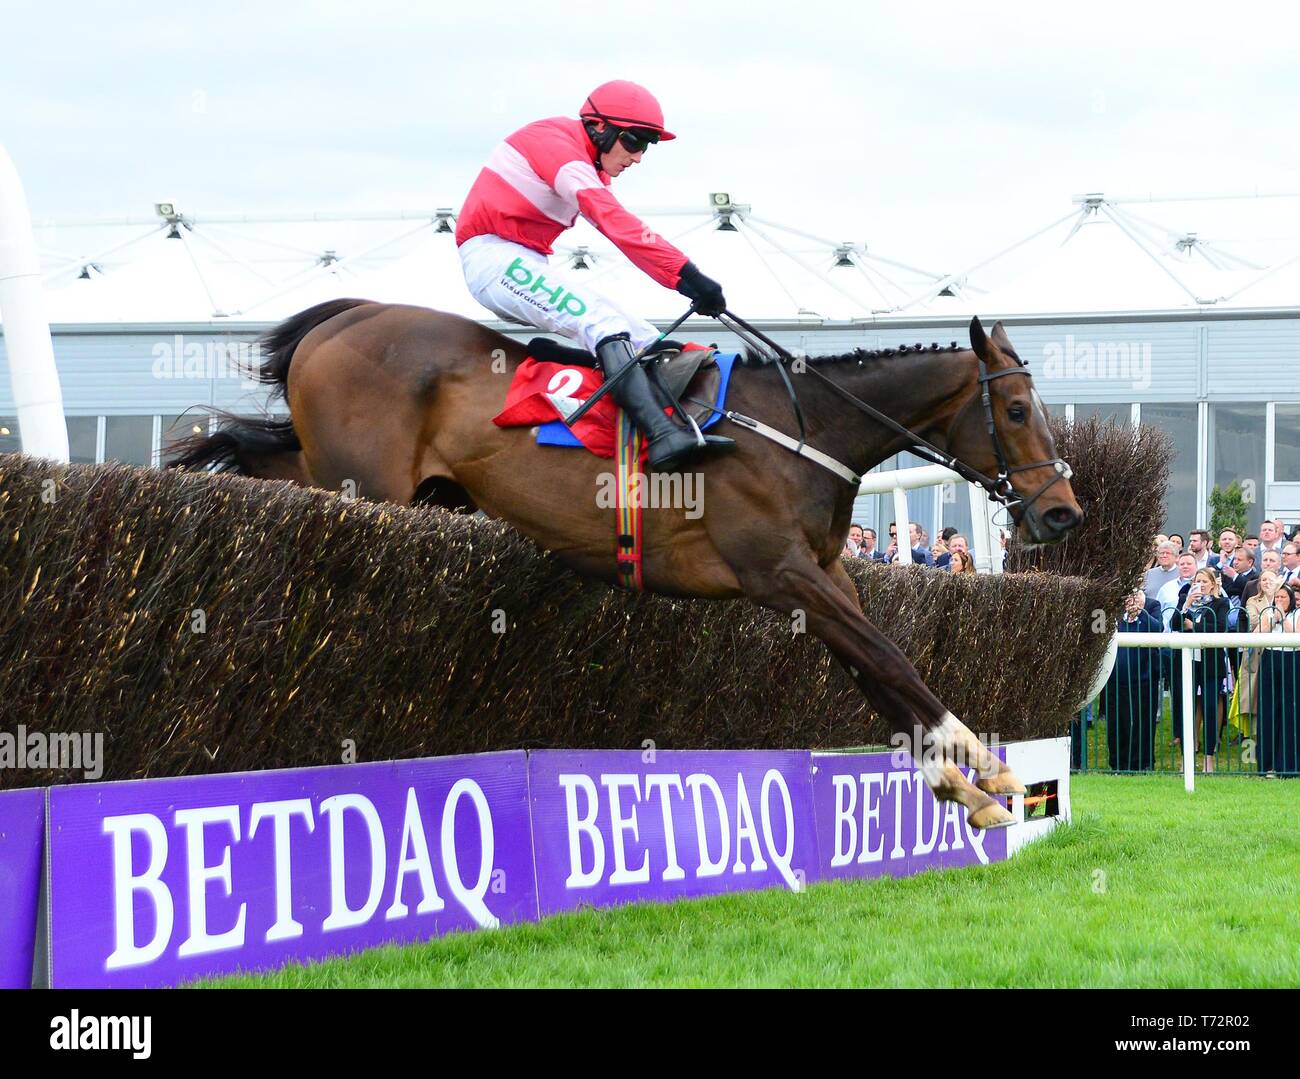 Real Steel and Paul Townend jump the last to win the EMS Copiers Novice Handicap Steeplechase during day four of the Punchestown Festival at Punchestown Racecourse, County Kildare, Ireland. Stock Photo